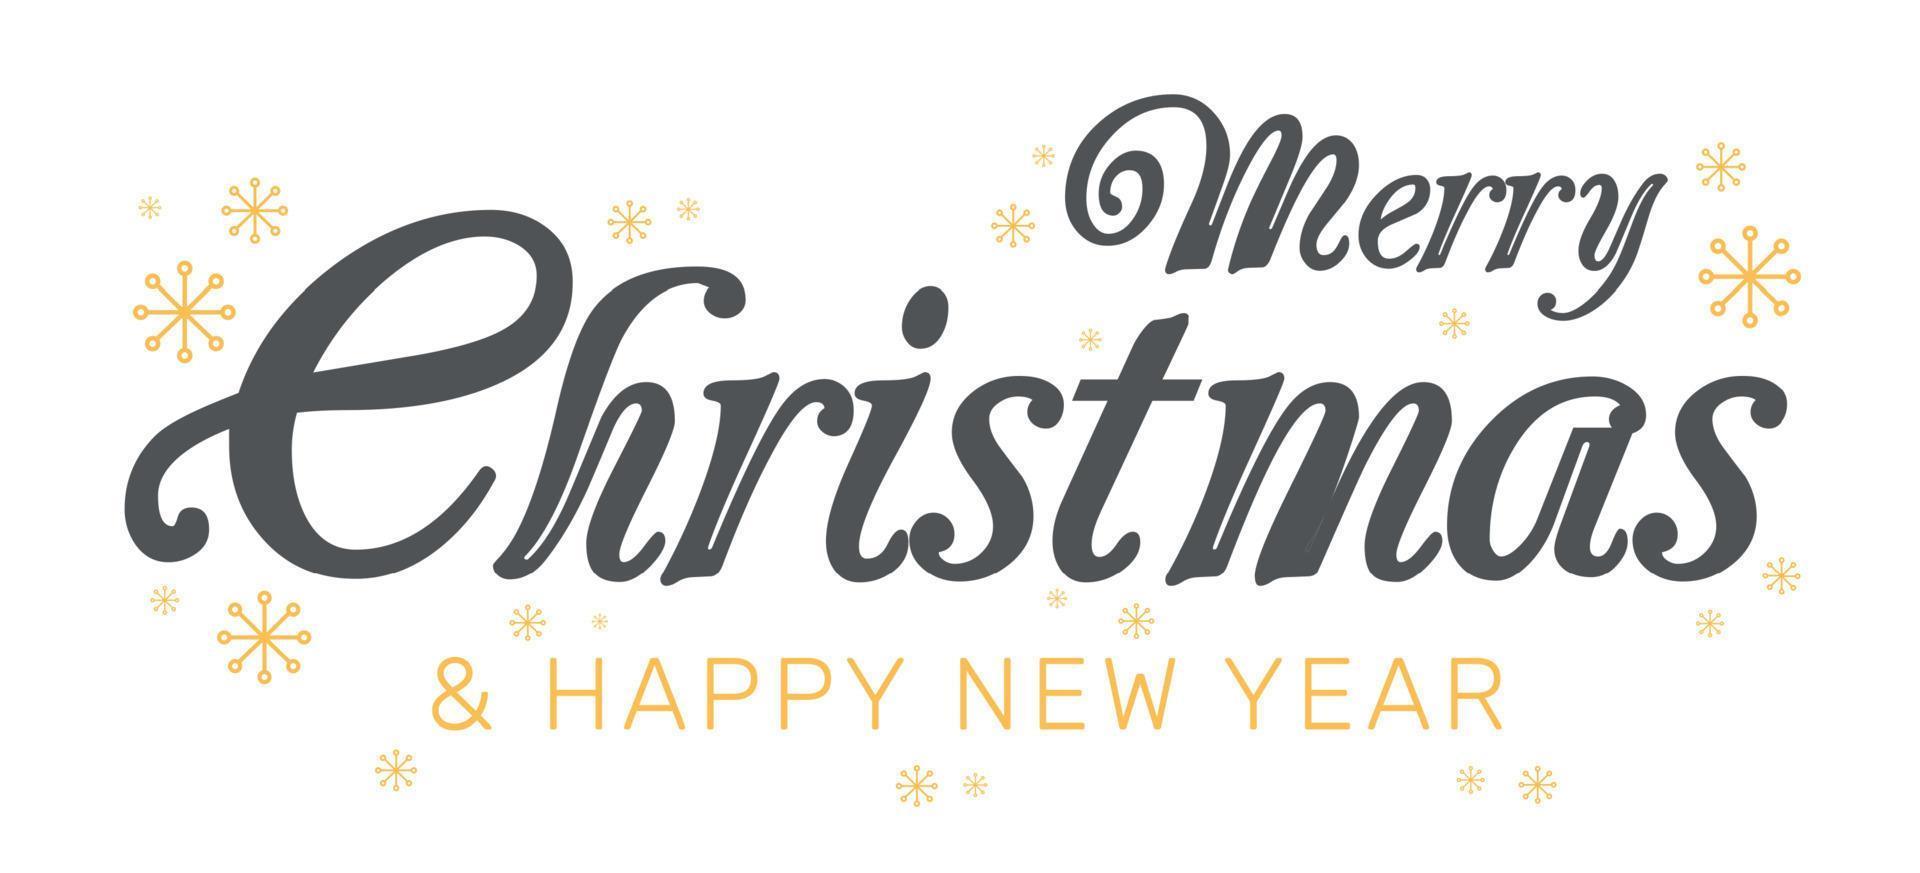 Christmas lettering with snowflakes and stars. New Year lettering with stars and snowflakes. Merry Christmas and Happy New Year. Vector illustration